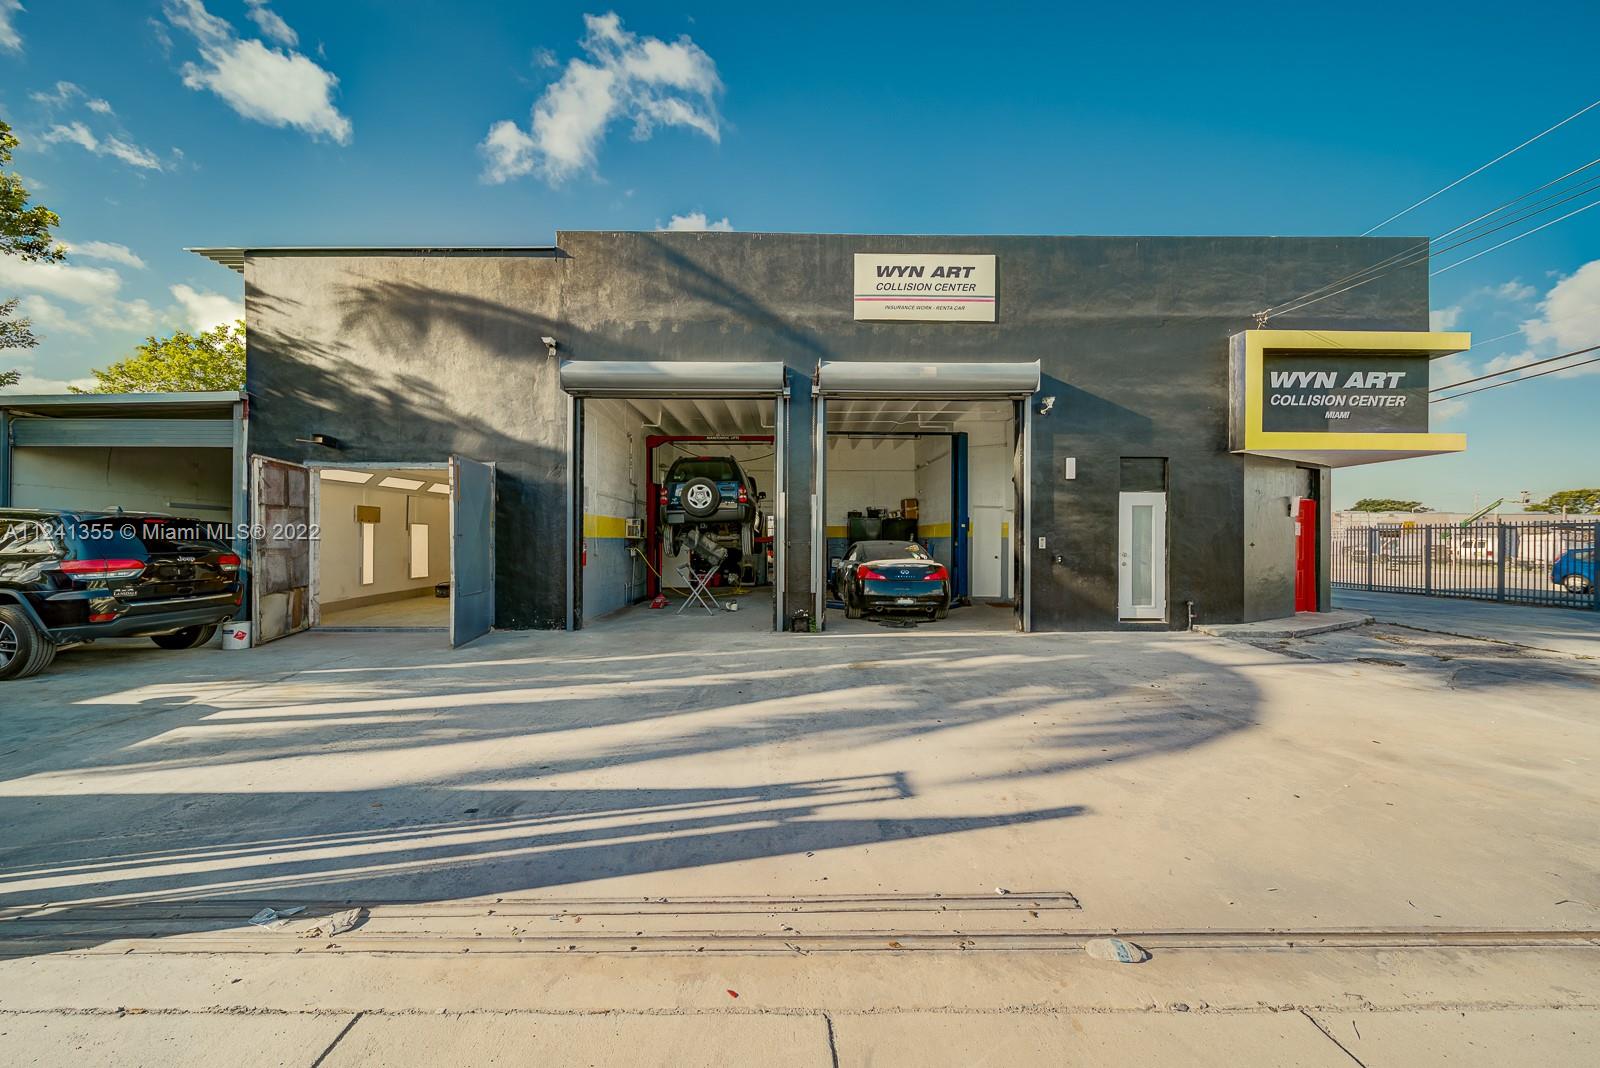 Great opportunity to LEASE a turn-key 11,282 Sq Ft Collision Repair/Body Shop/Auto Sales Dealership WITH NO KEY MONEY. Located in Wynwood/I-95, minutes from Downtown and the Airport. Paint booth, 5 lifts, 3 frame machines, 2 compressors, forklift, shaded roof working areas, high ceilings, 3 bays, 2 private offices, 1 modern reception/waiting room, computers,  3 bathrooms, 14 CCTV cameras. All licenses and permits are up to date and included in the Lease. 1 year lease with option to renew. HD Video available upon request. CALL US, WE PICK UP!